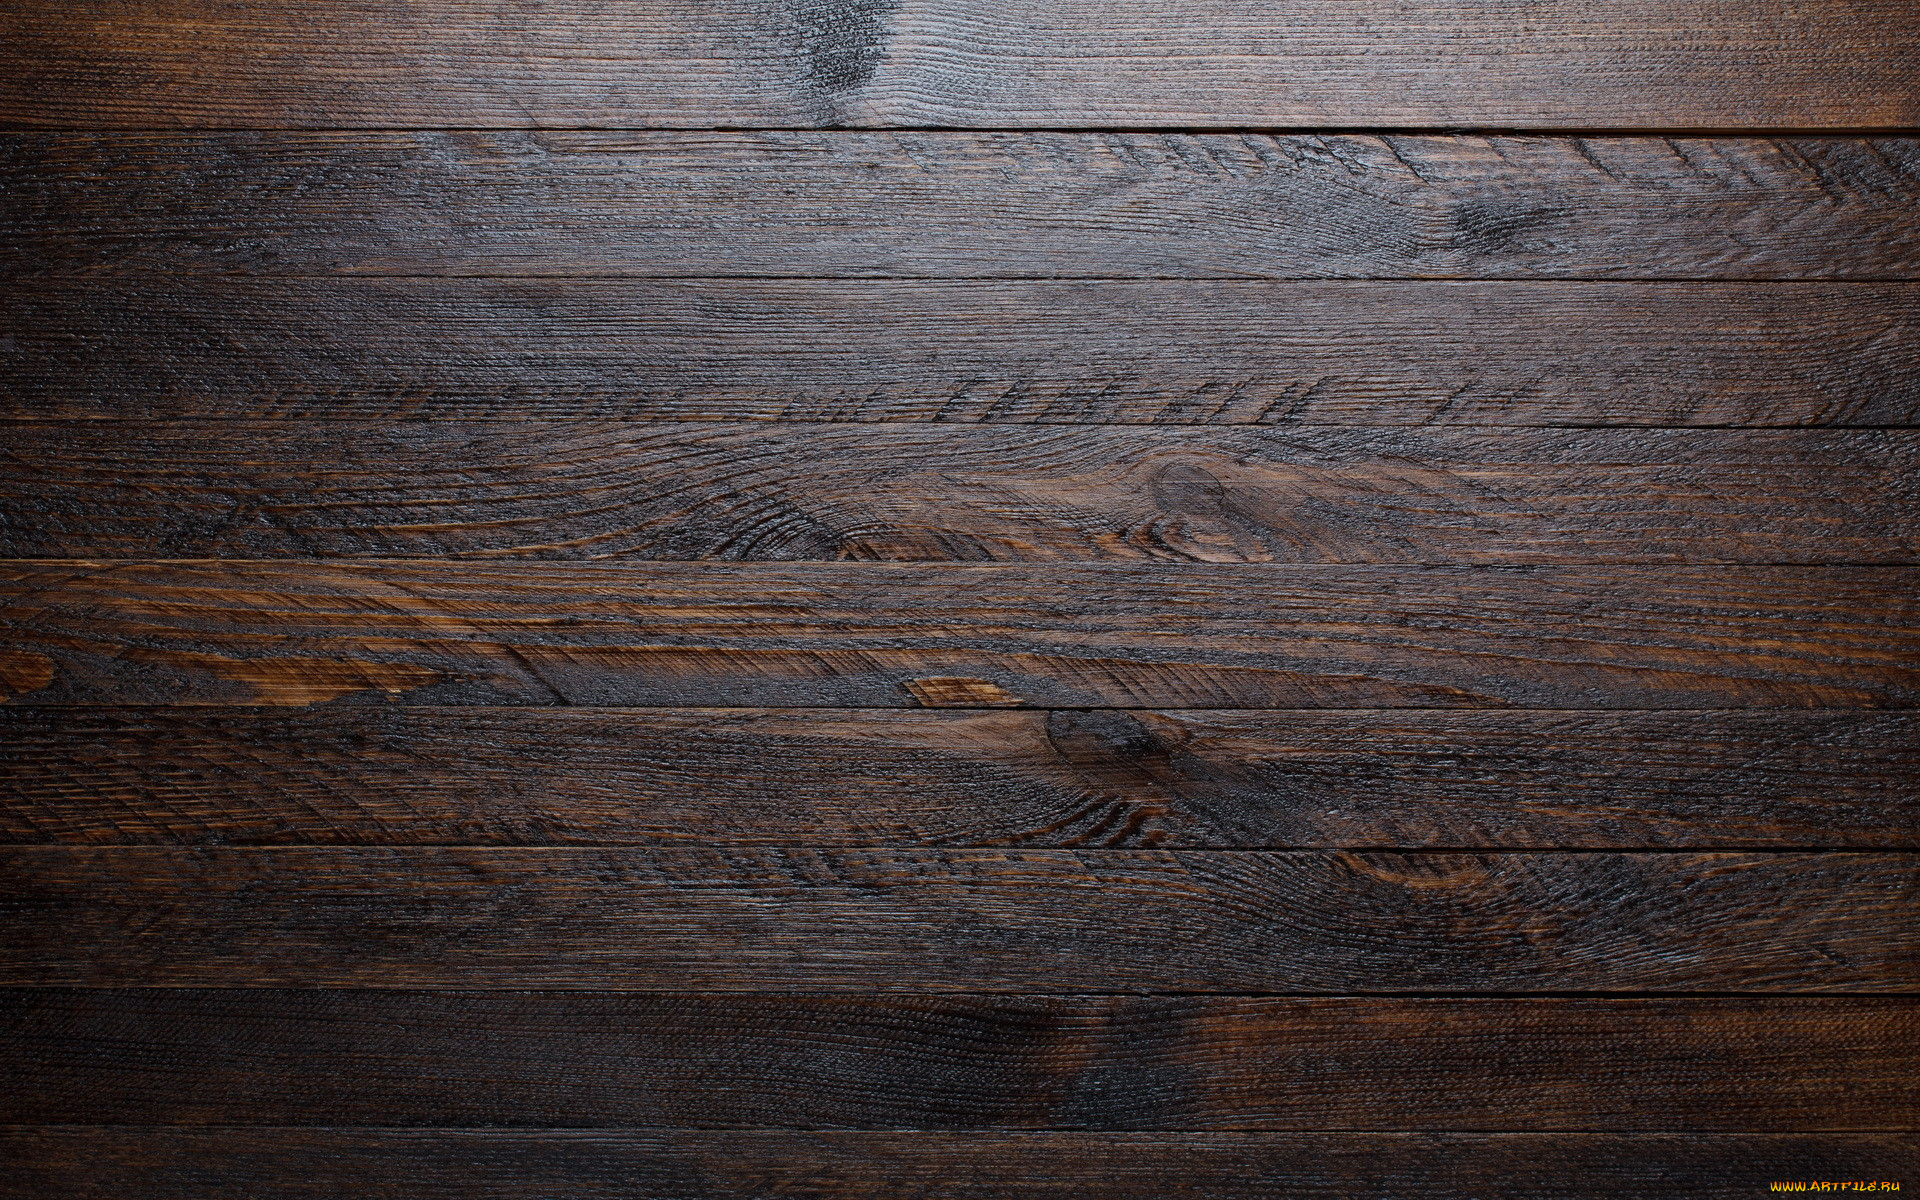  , , , rustic, wooden, colour, pattern, opaque, wood, dark